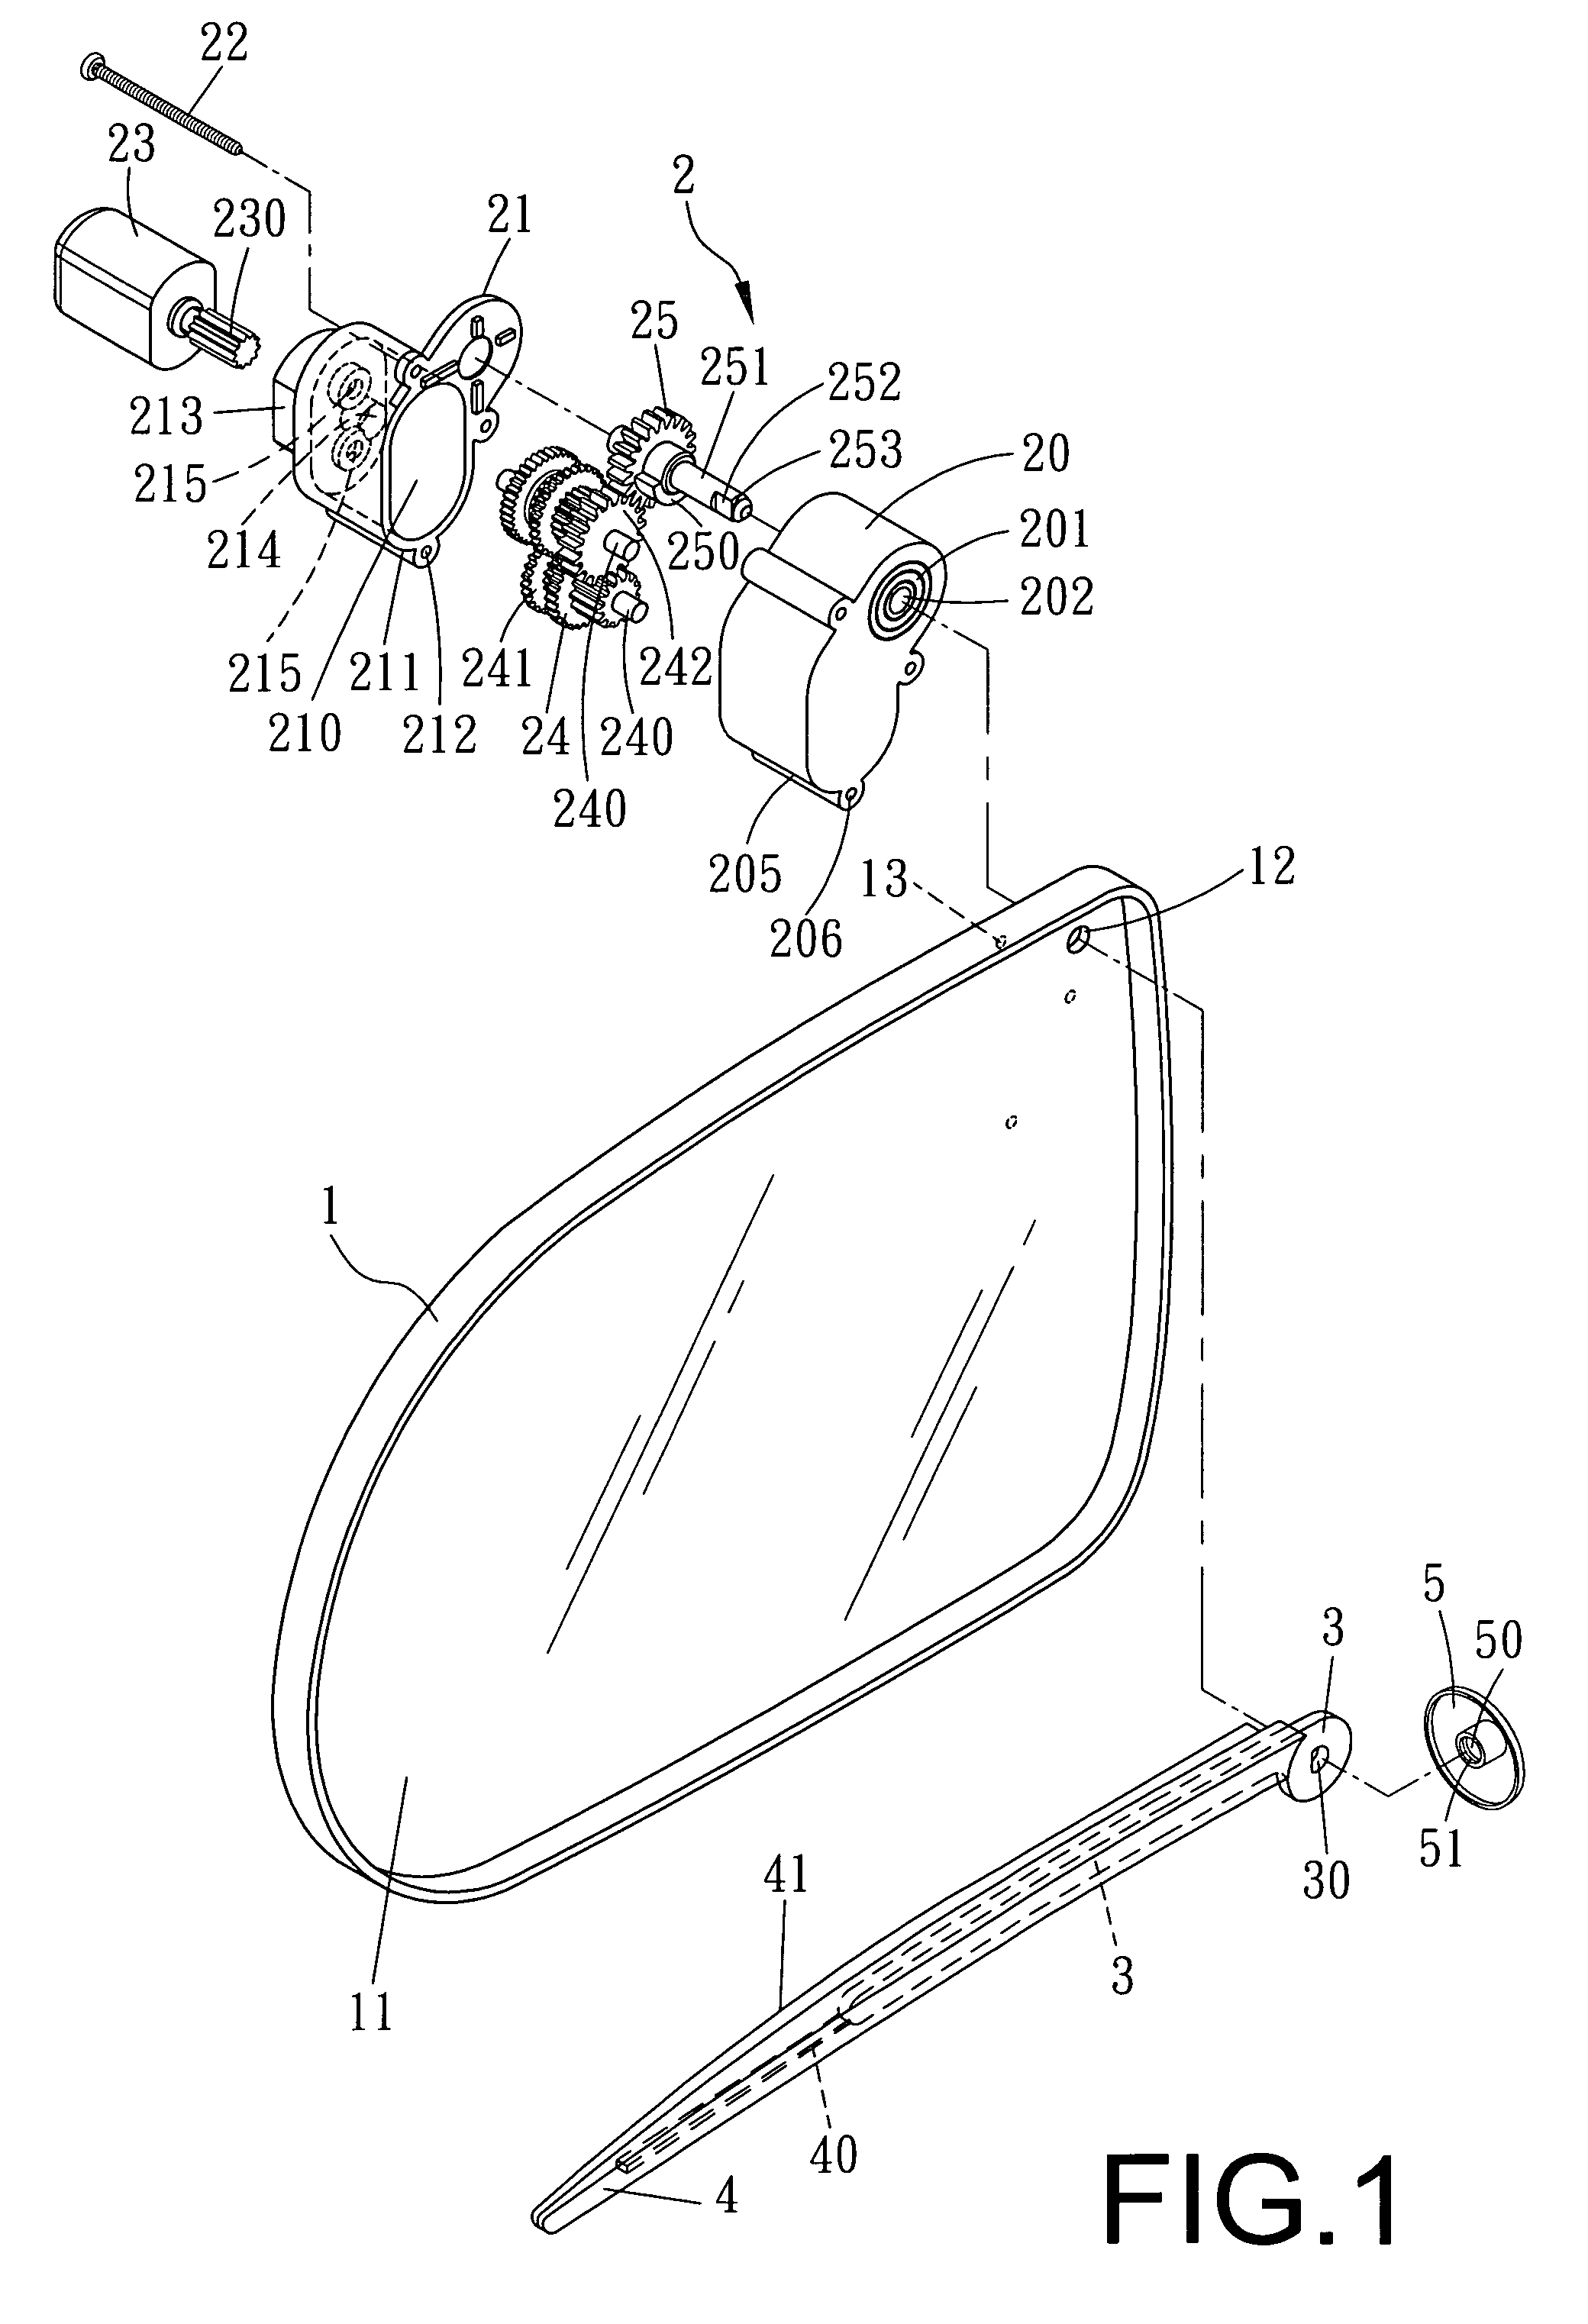 Wiper for an automobile rear-view mirror